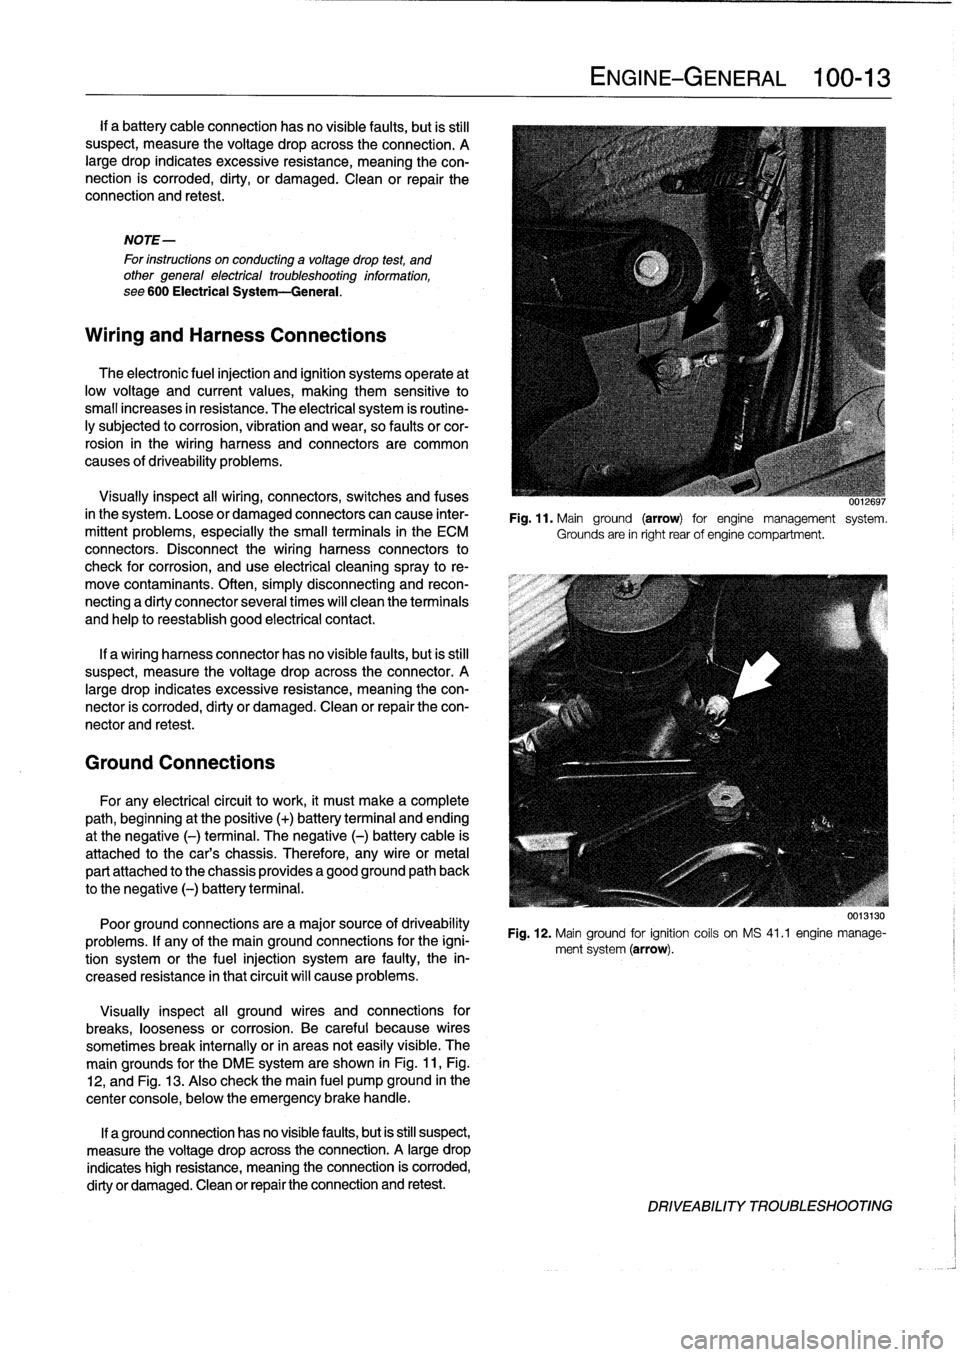 BMW 318i 1996 E36 Workshop Manual 
If
a
battery
cableconnection
hasno
visible
faults,
but
is
still
suspect,
measure
the
voltage
drop
across
the
connection
.
A
large
drop
indicates
excessive
resistance,
meaning
the
con-
nection
is
corr